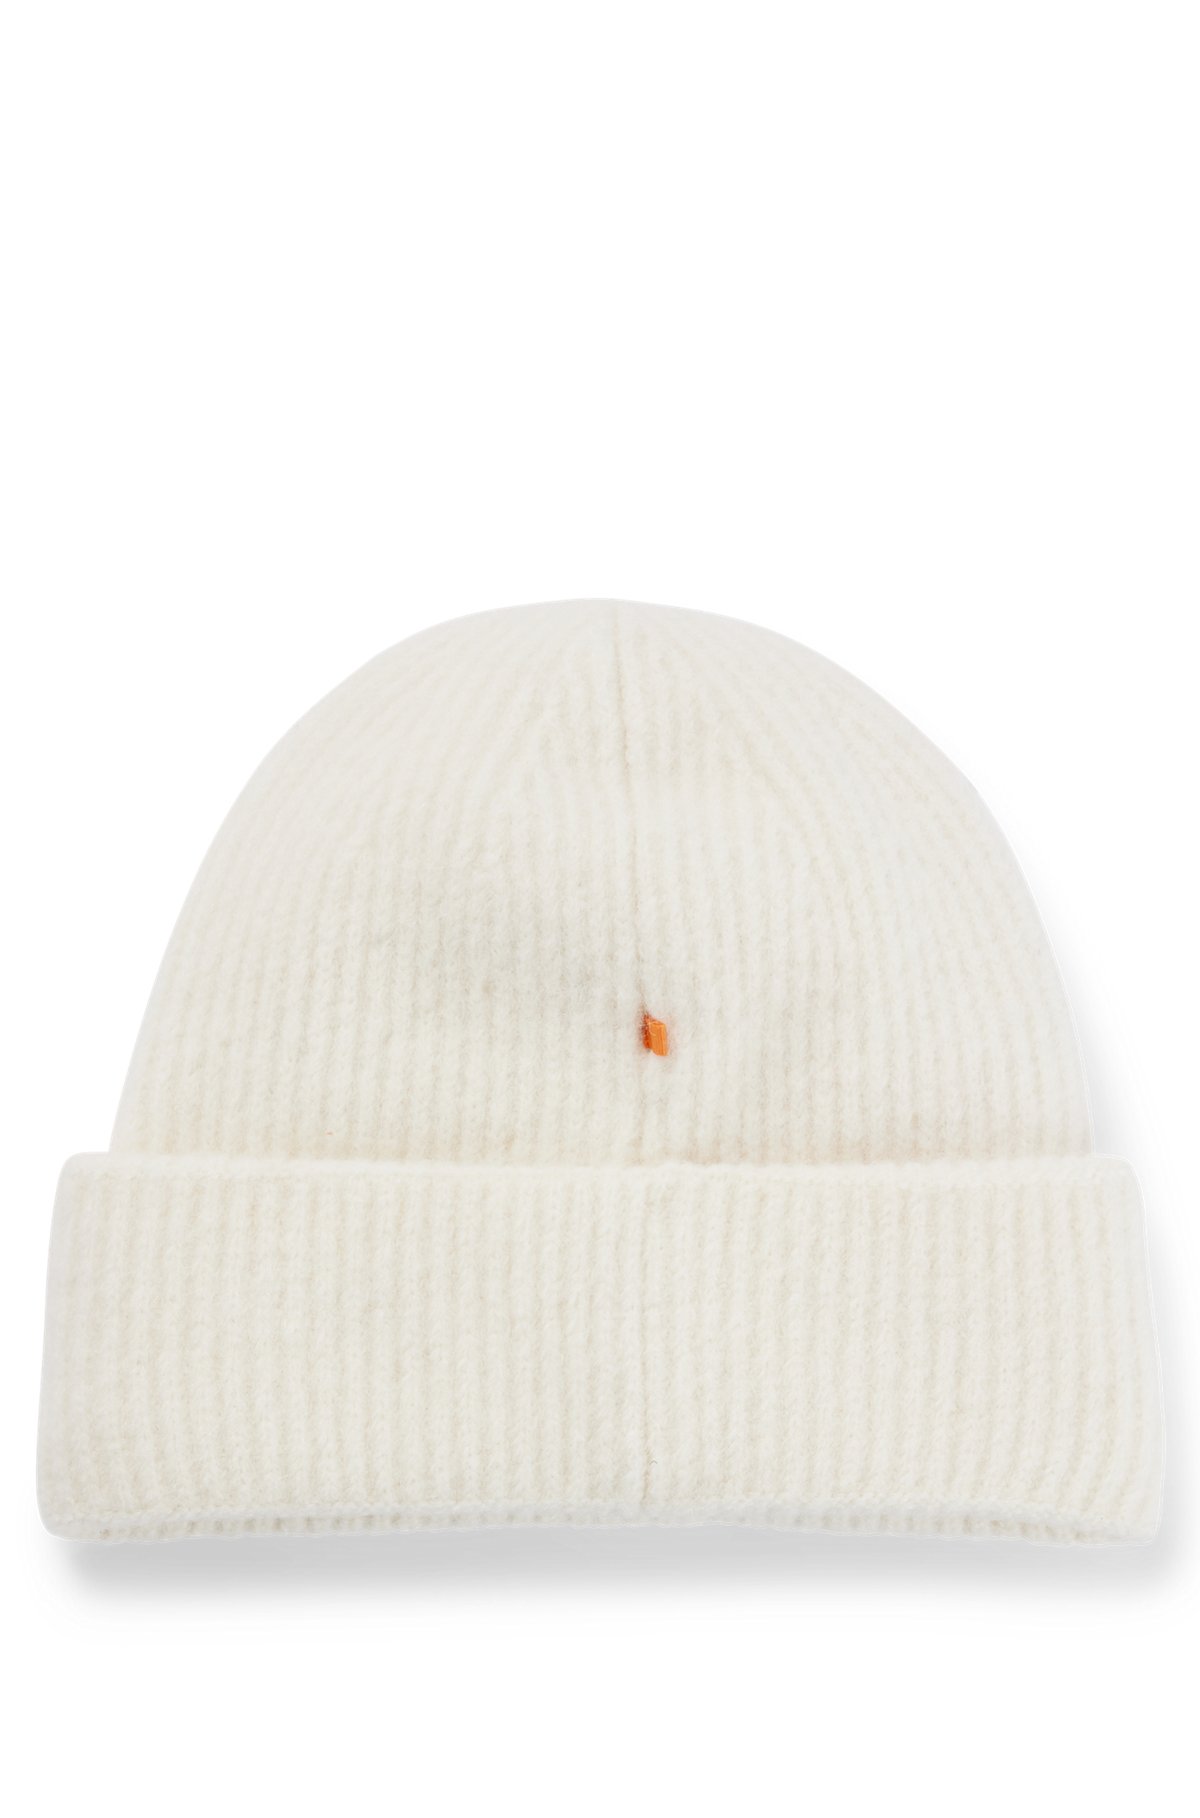 Ribbed beanie hat with embroidered logo, White